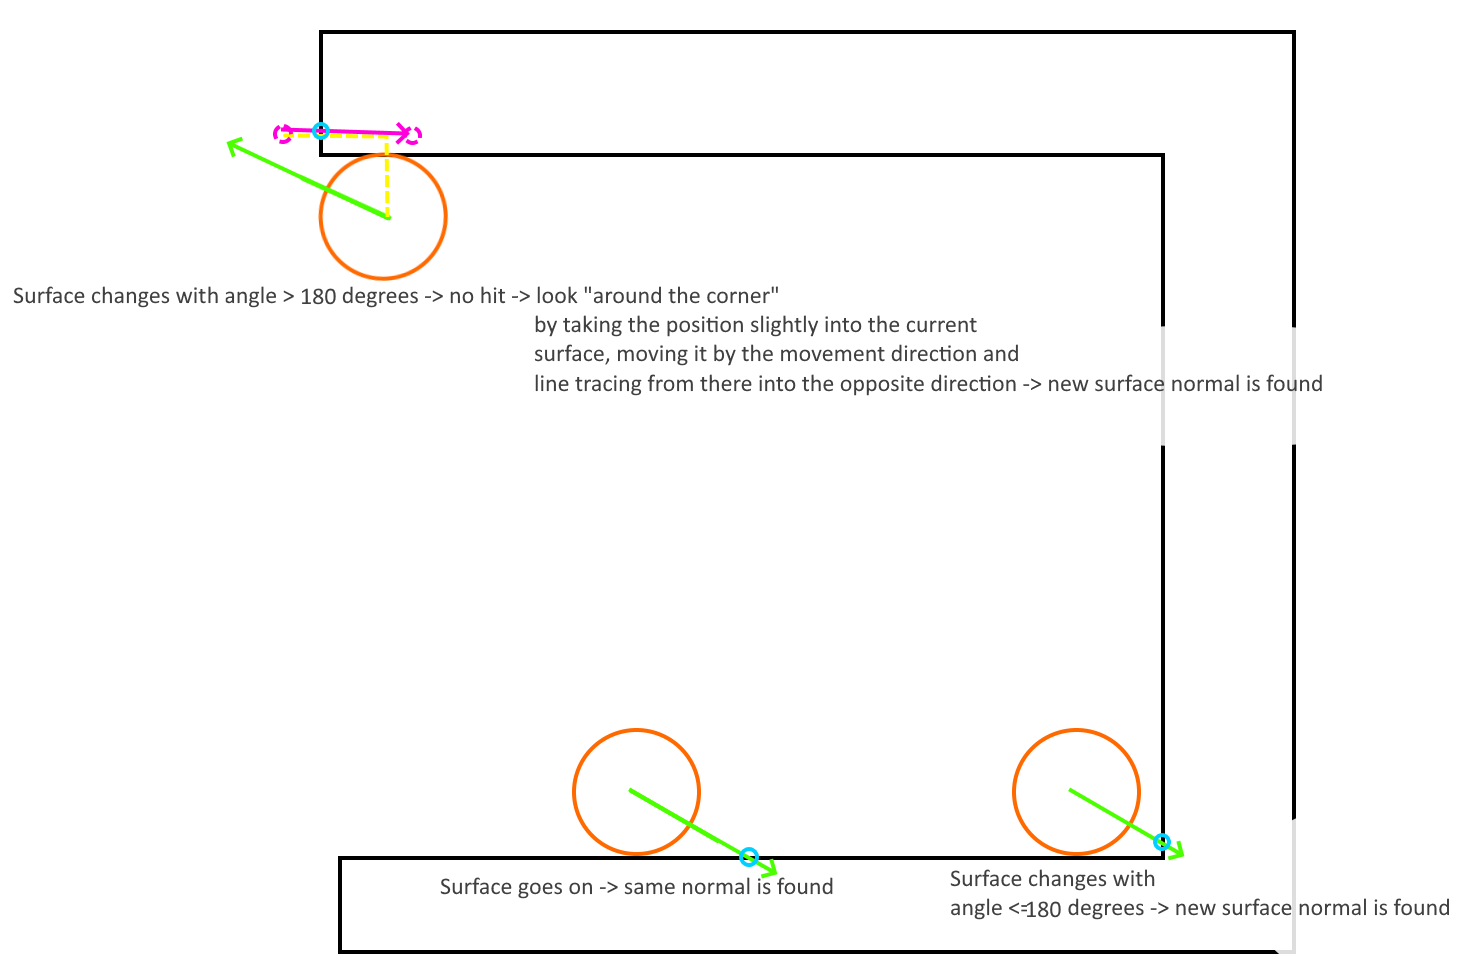 Simple diagram & explanation of how shadow movement was implemented